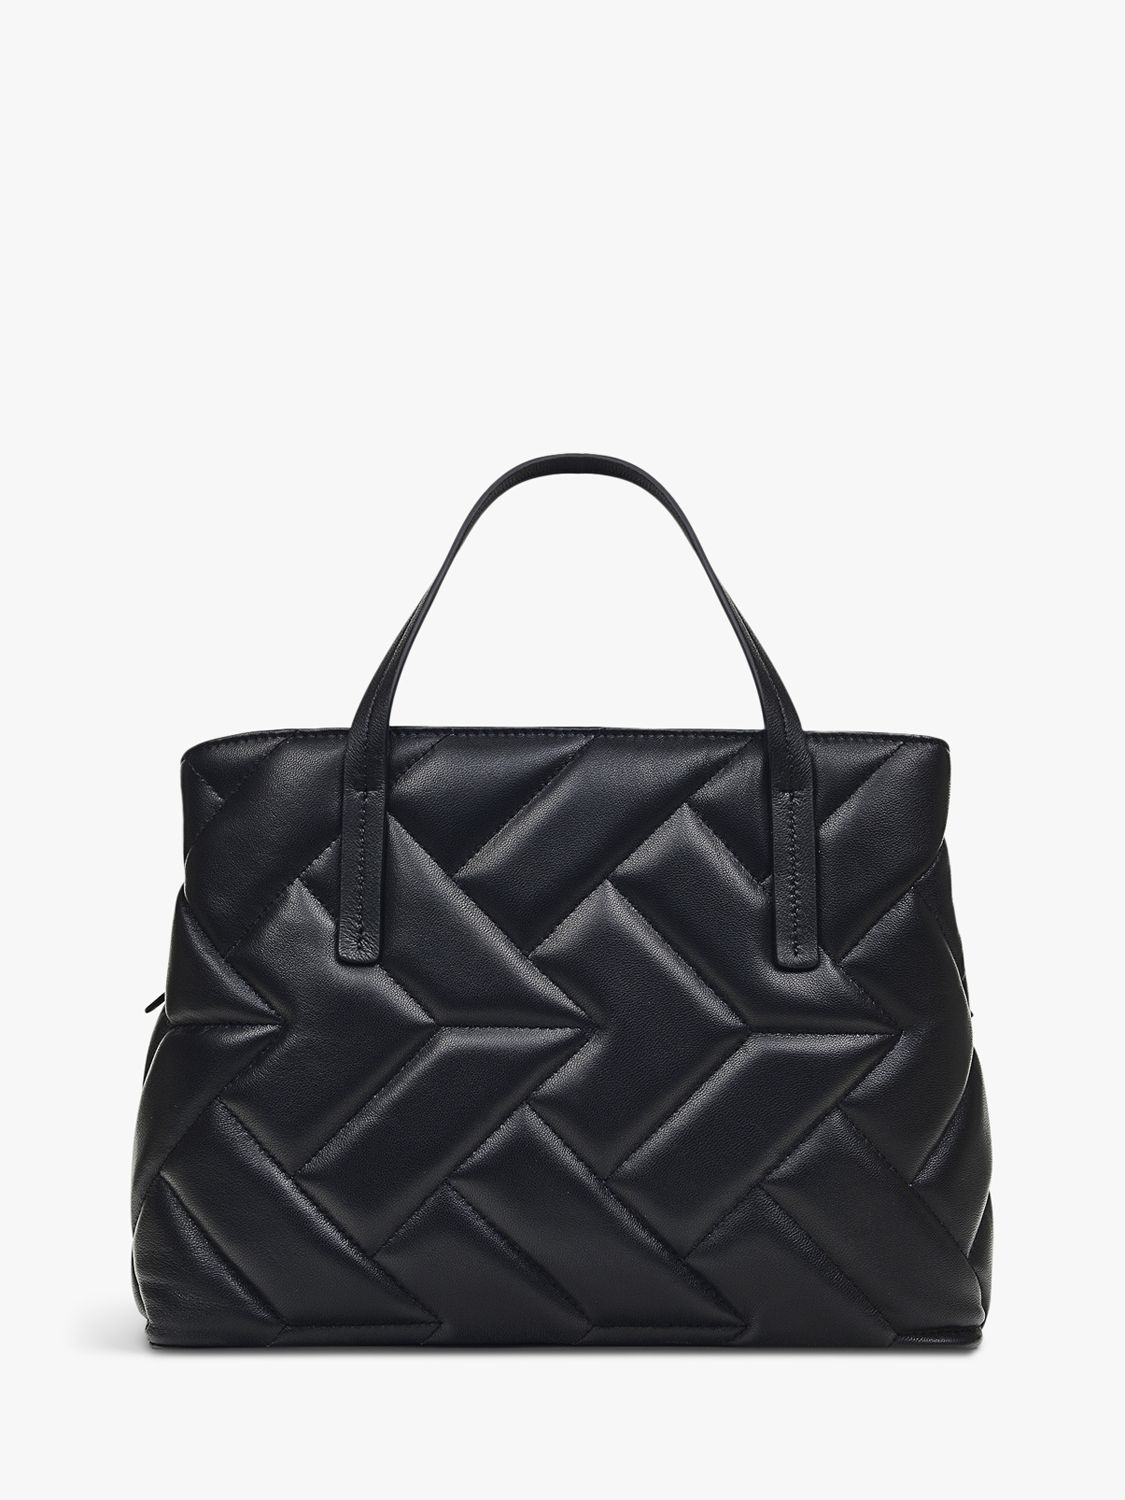 Radley Dukes Place Quilted Leather Medium Ziptop Grab Bag, Black, One Size